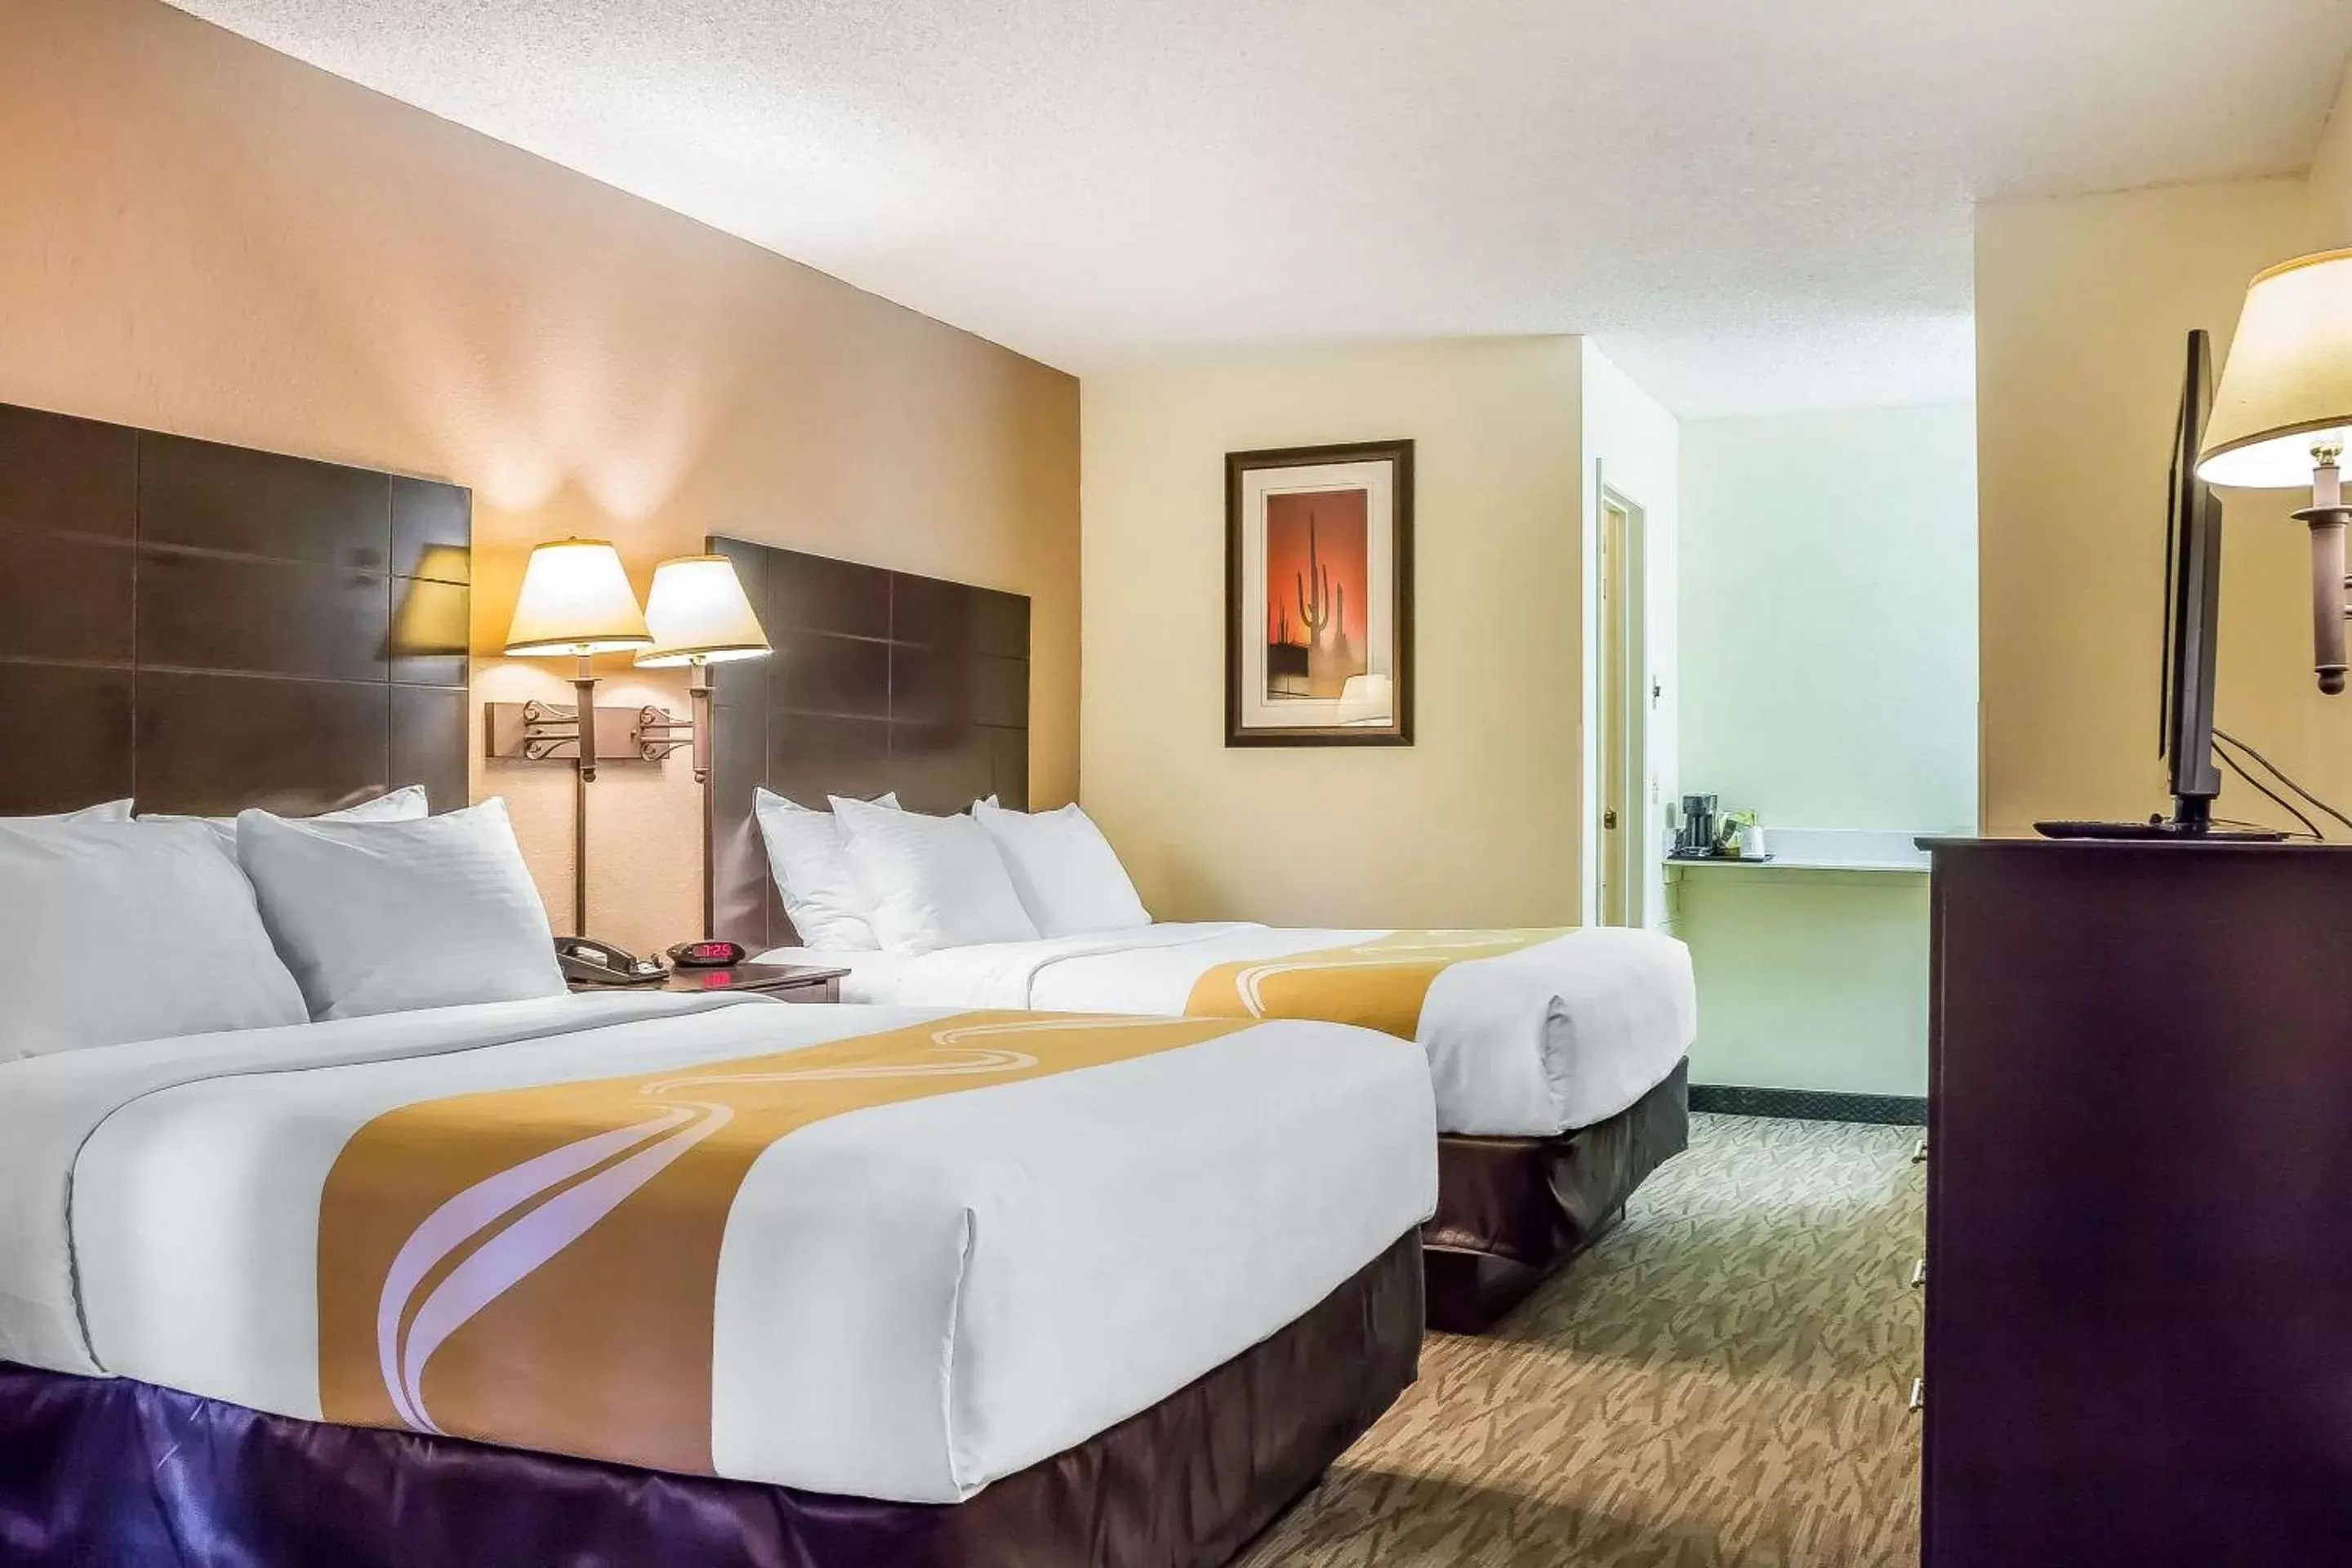 Queen Room with Two Queen Beds in Quality Inn Pinetop Lakeside